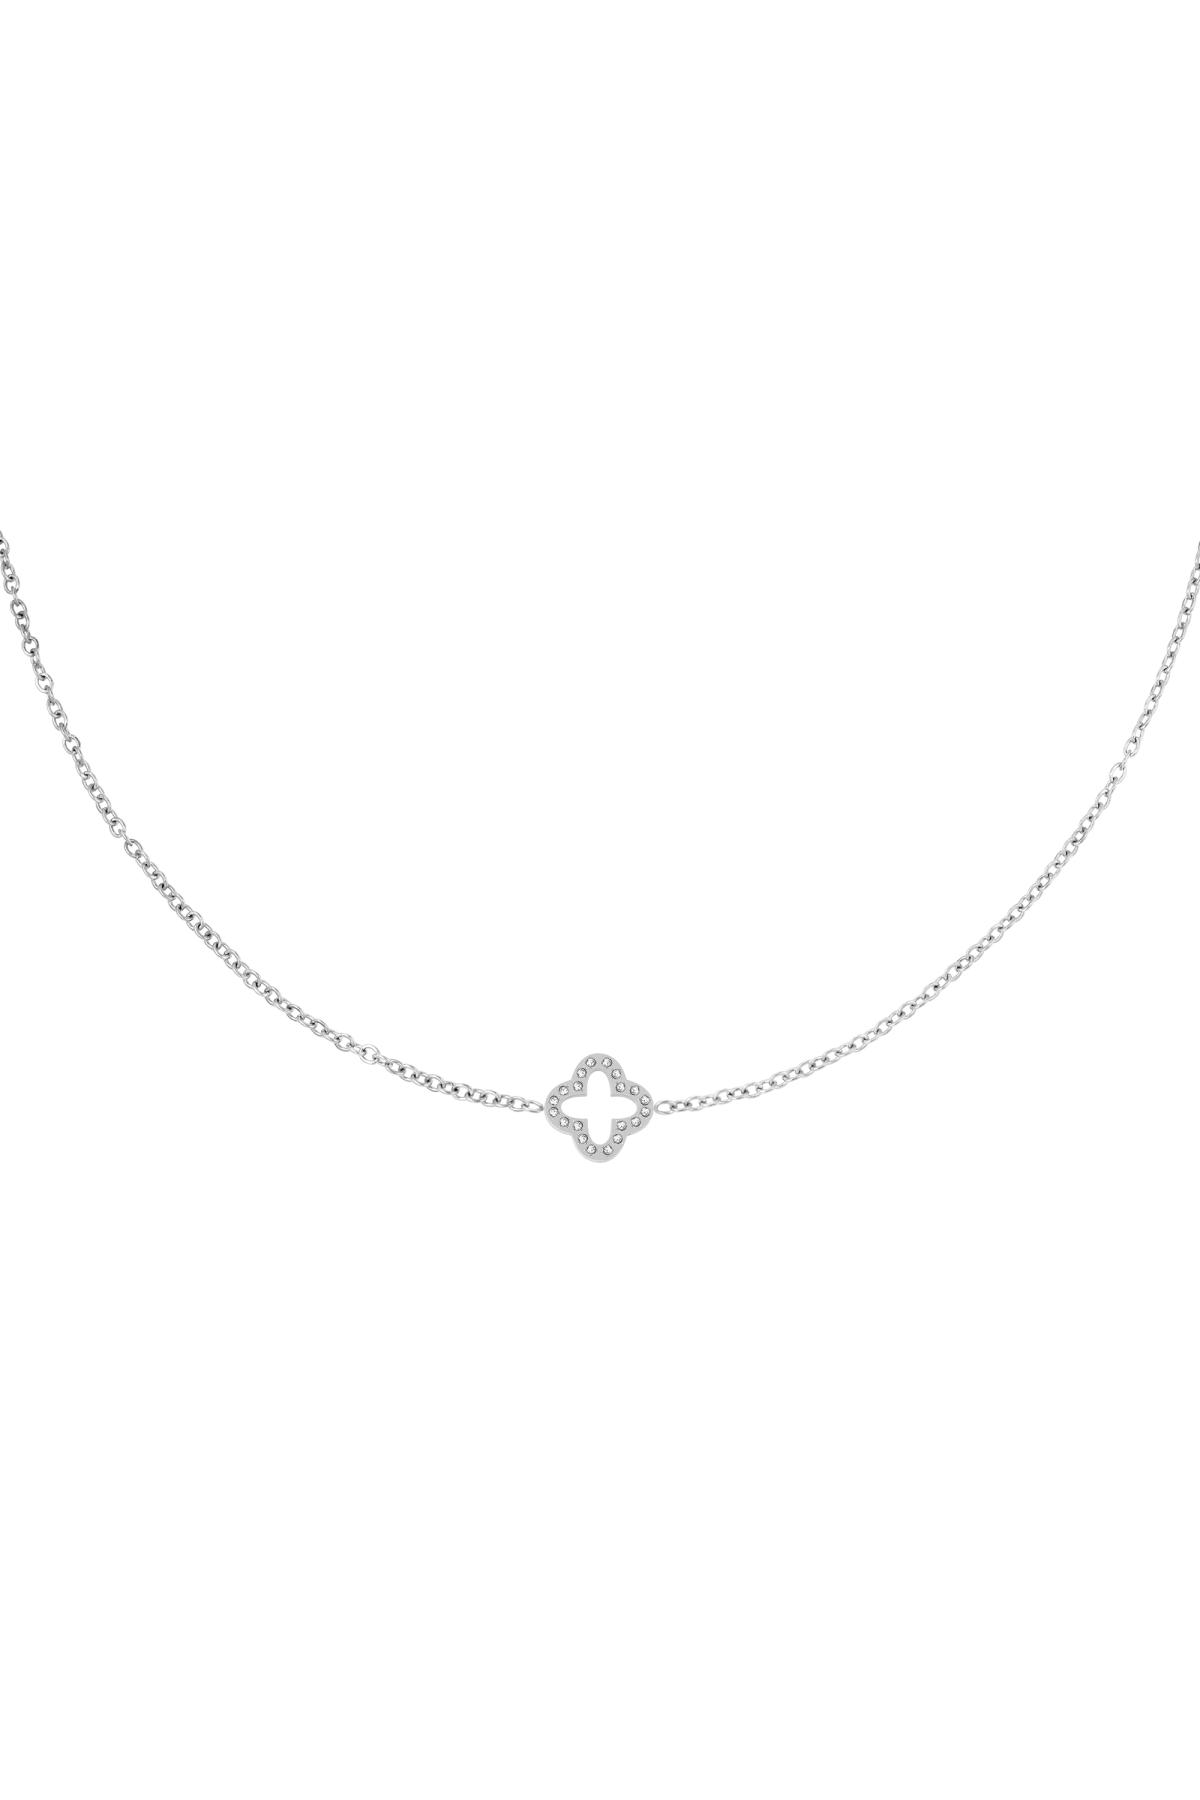 Necklace clover zircon Silver Stainless Steel